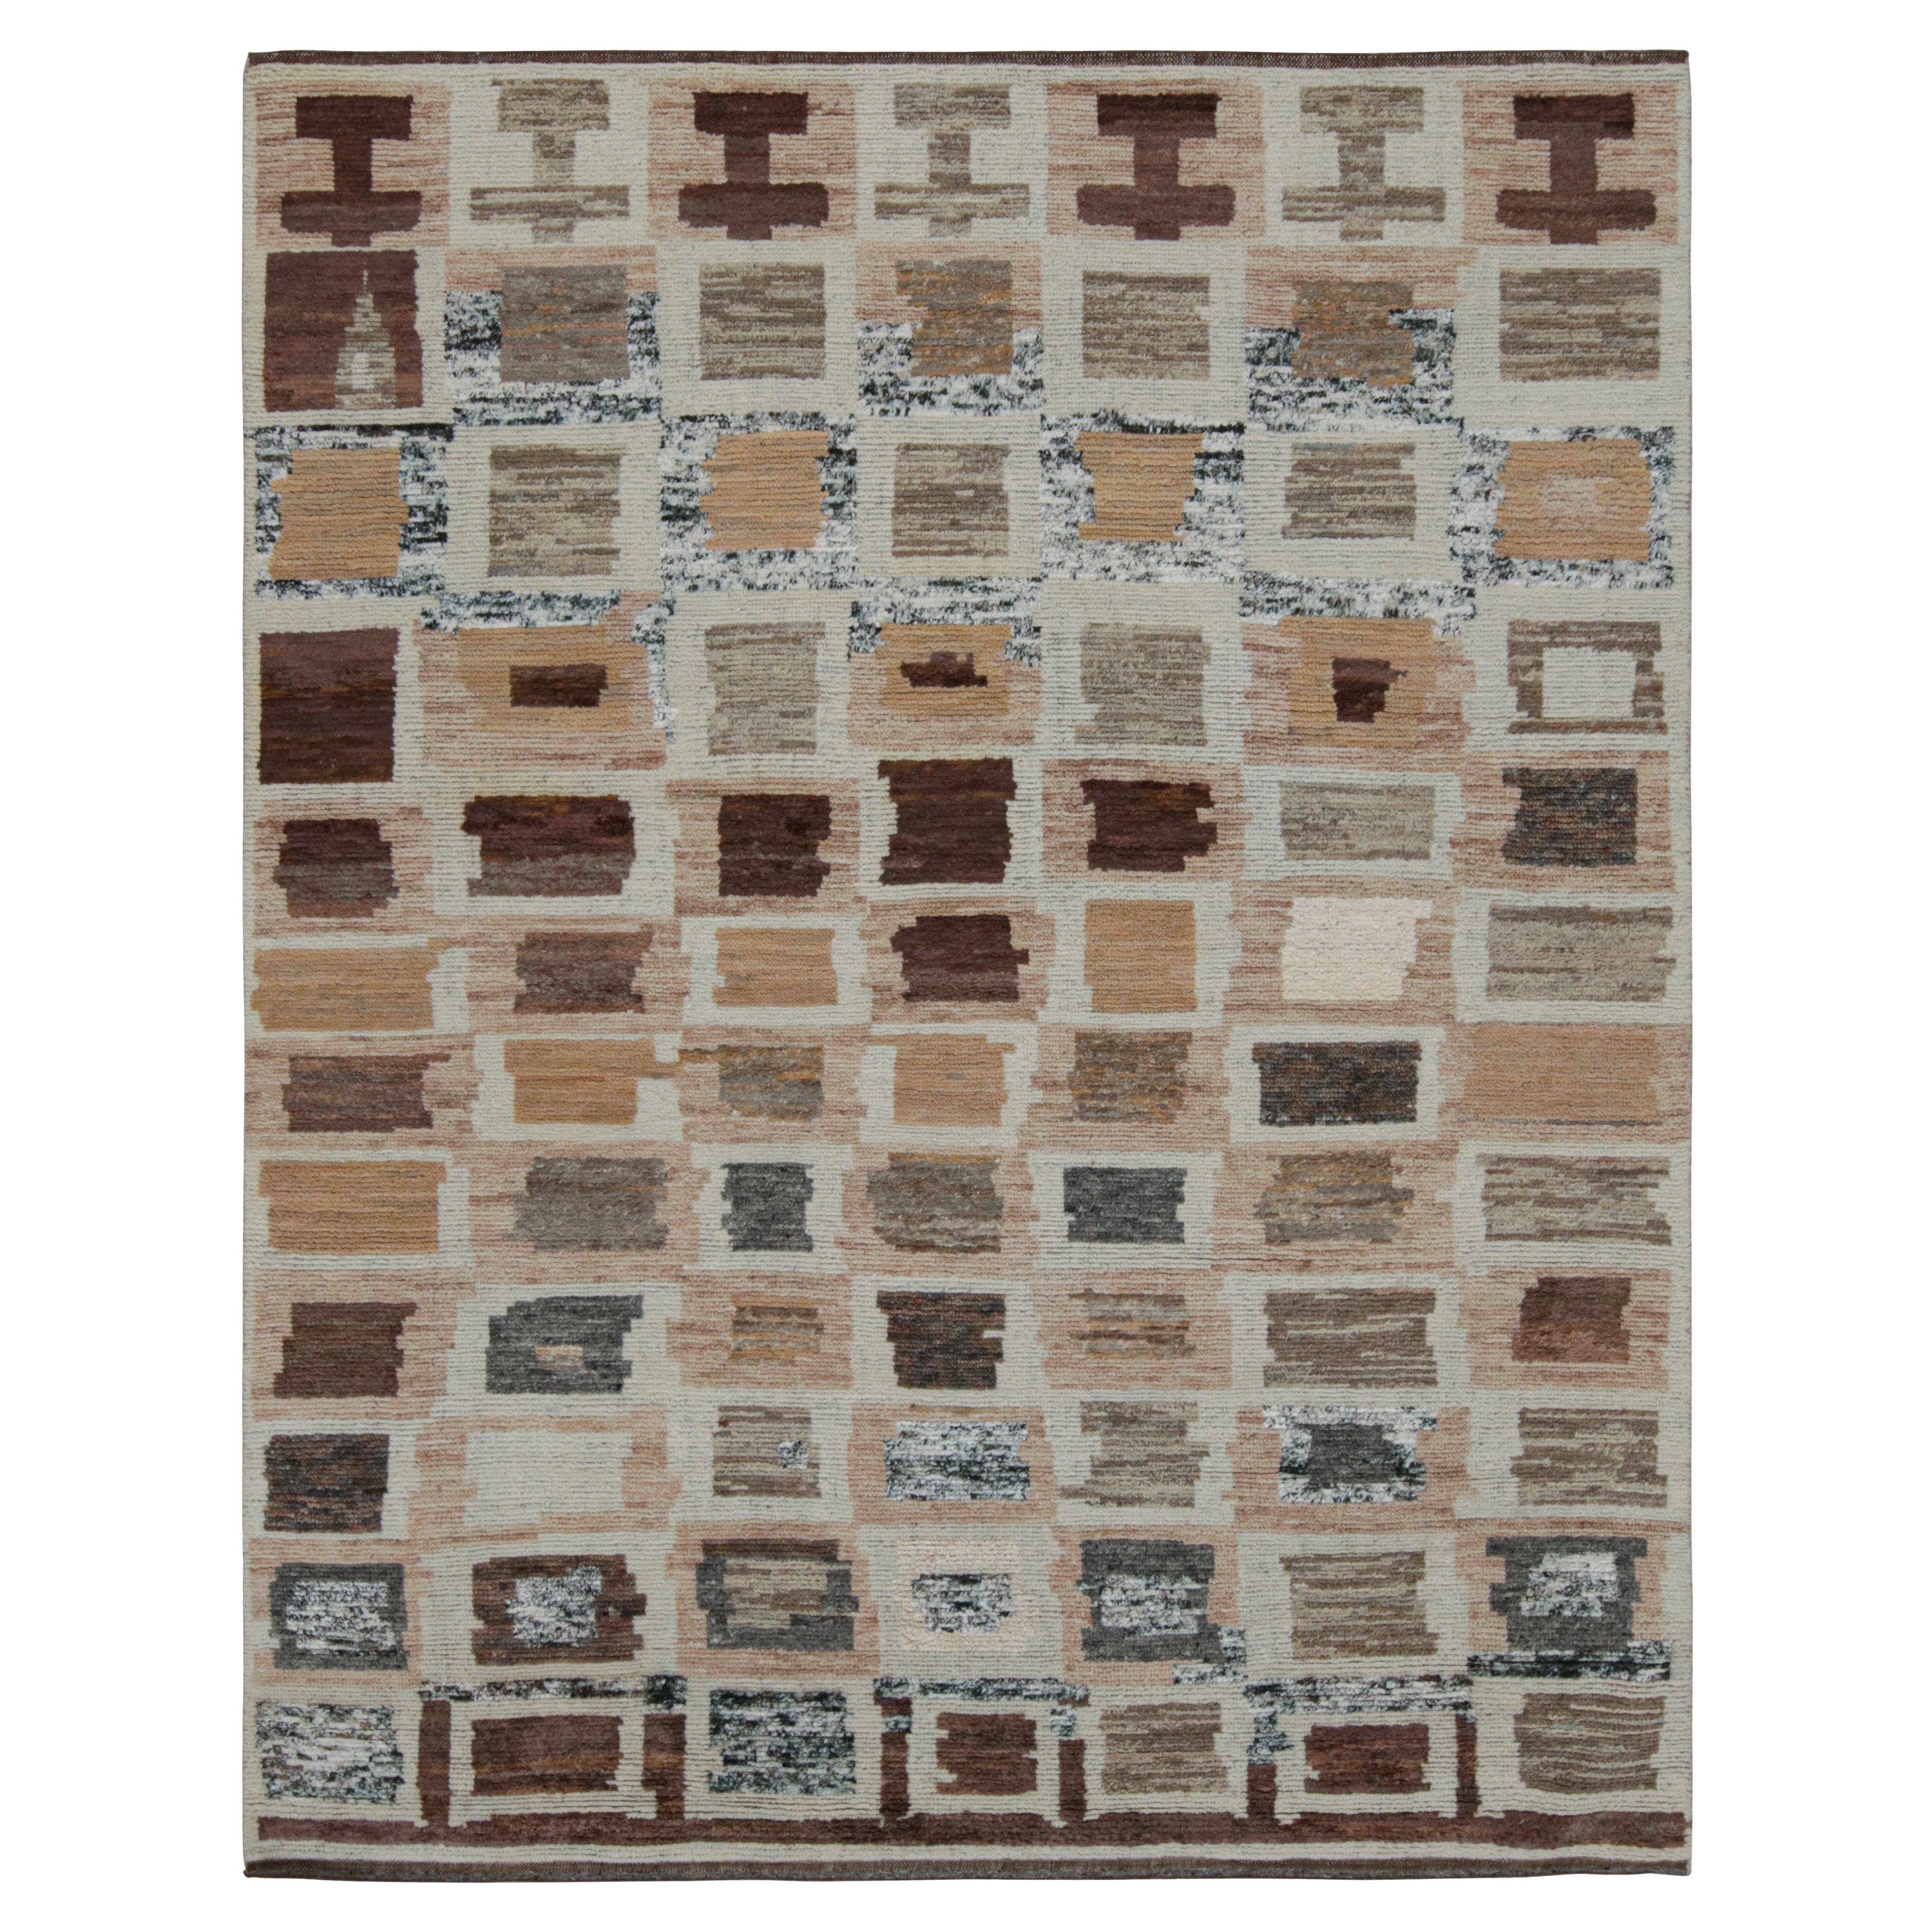 Rug & Kilim’s Geometric Moroccan Style Rug in Beige-Brown and Gray